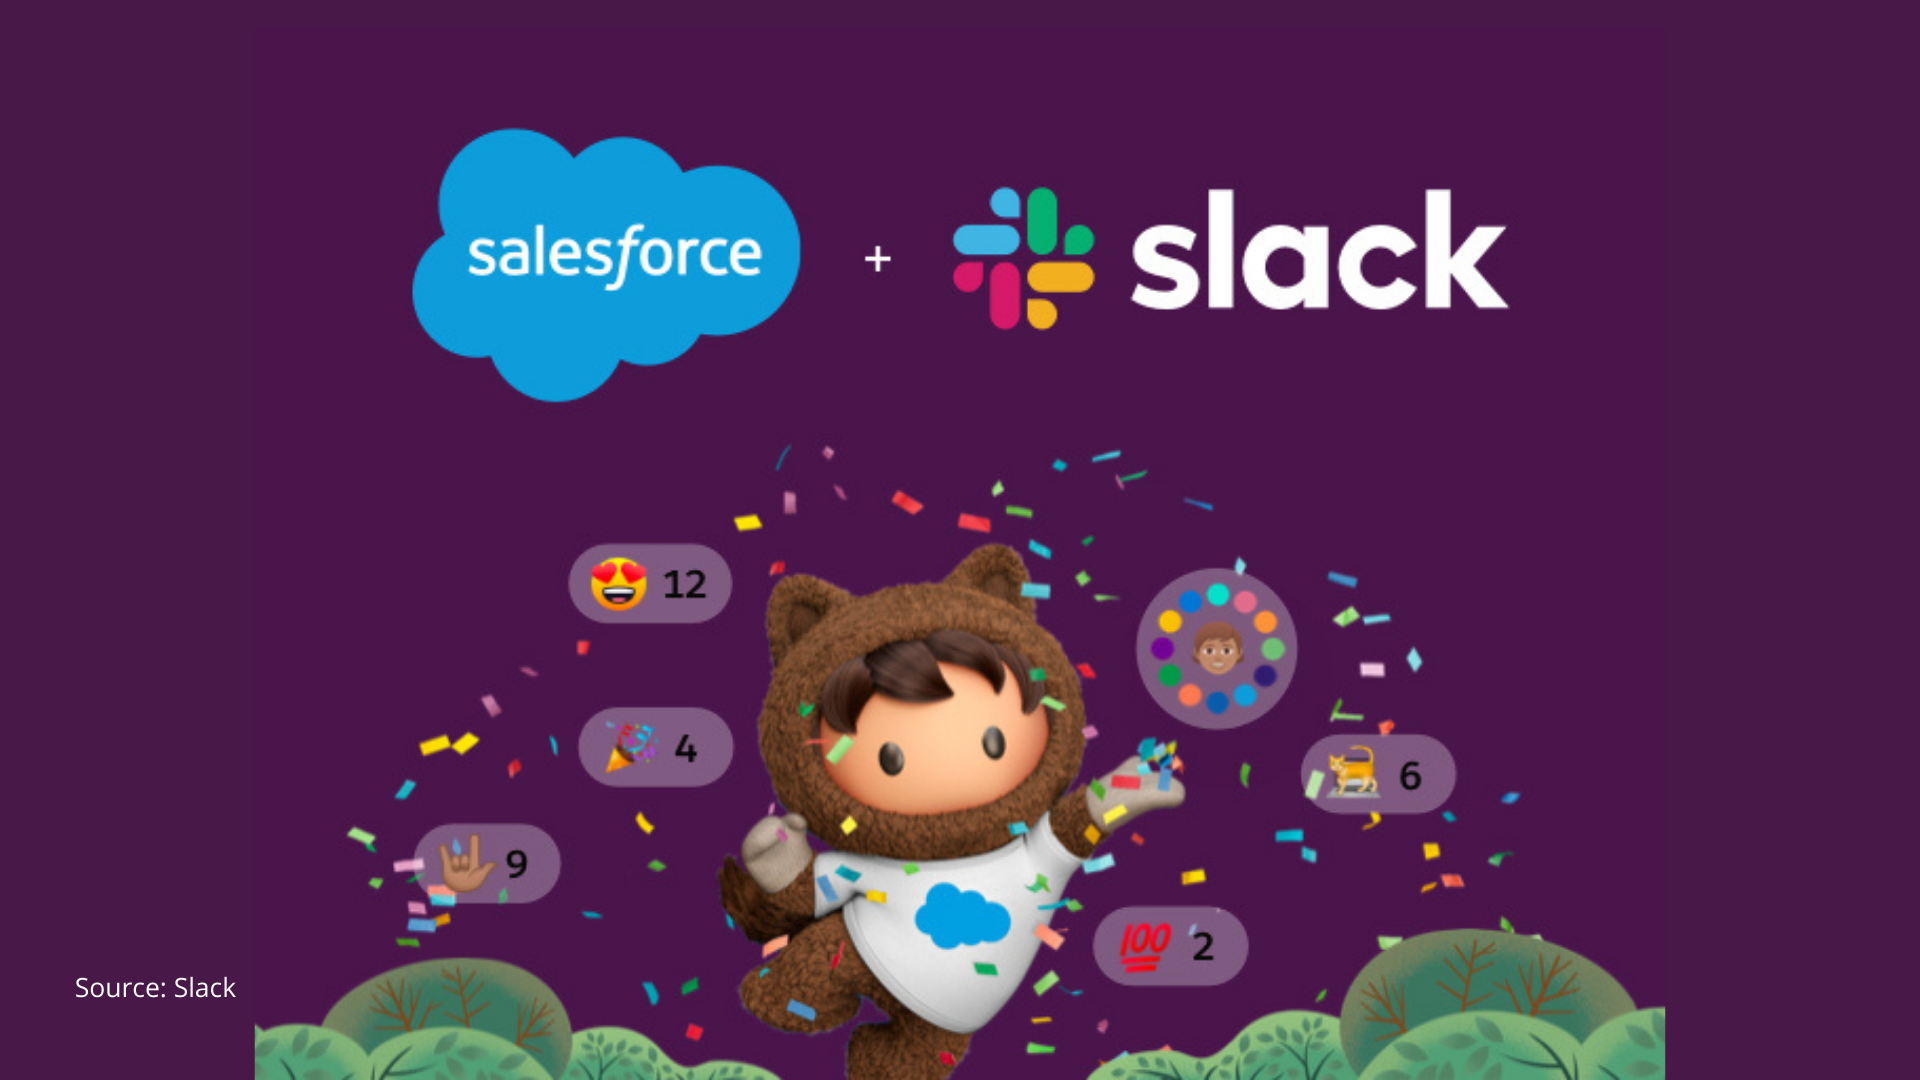 Salesforce, the Global Leader in CRM, will Acquire Slack